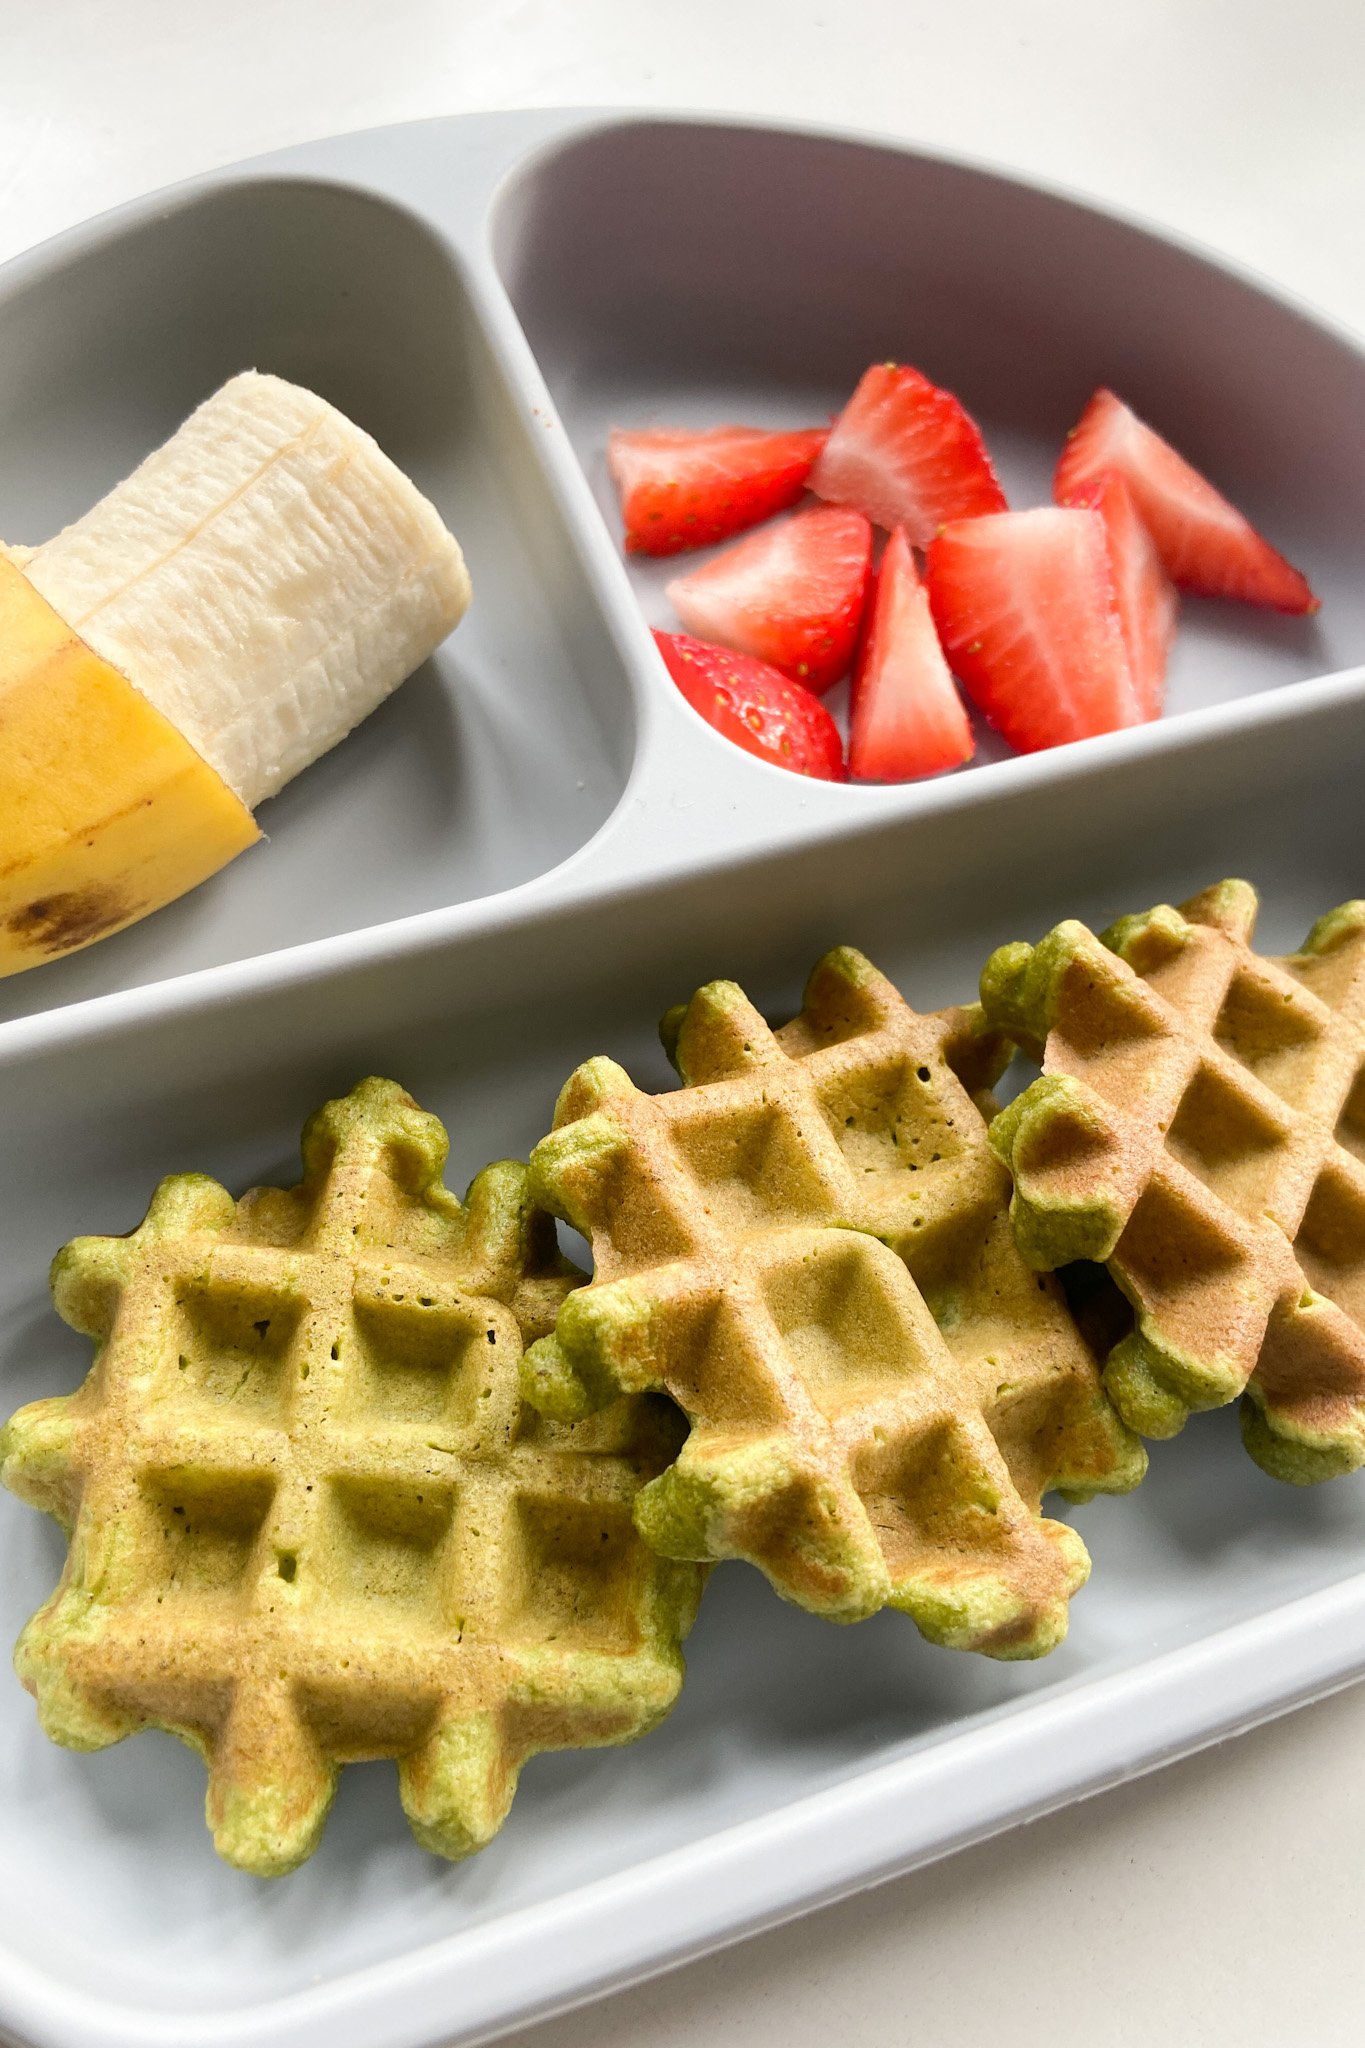 Spinach banana waffles served with a banana and strawberries